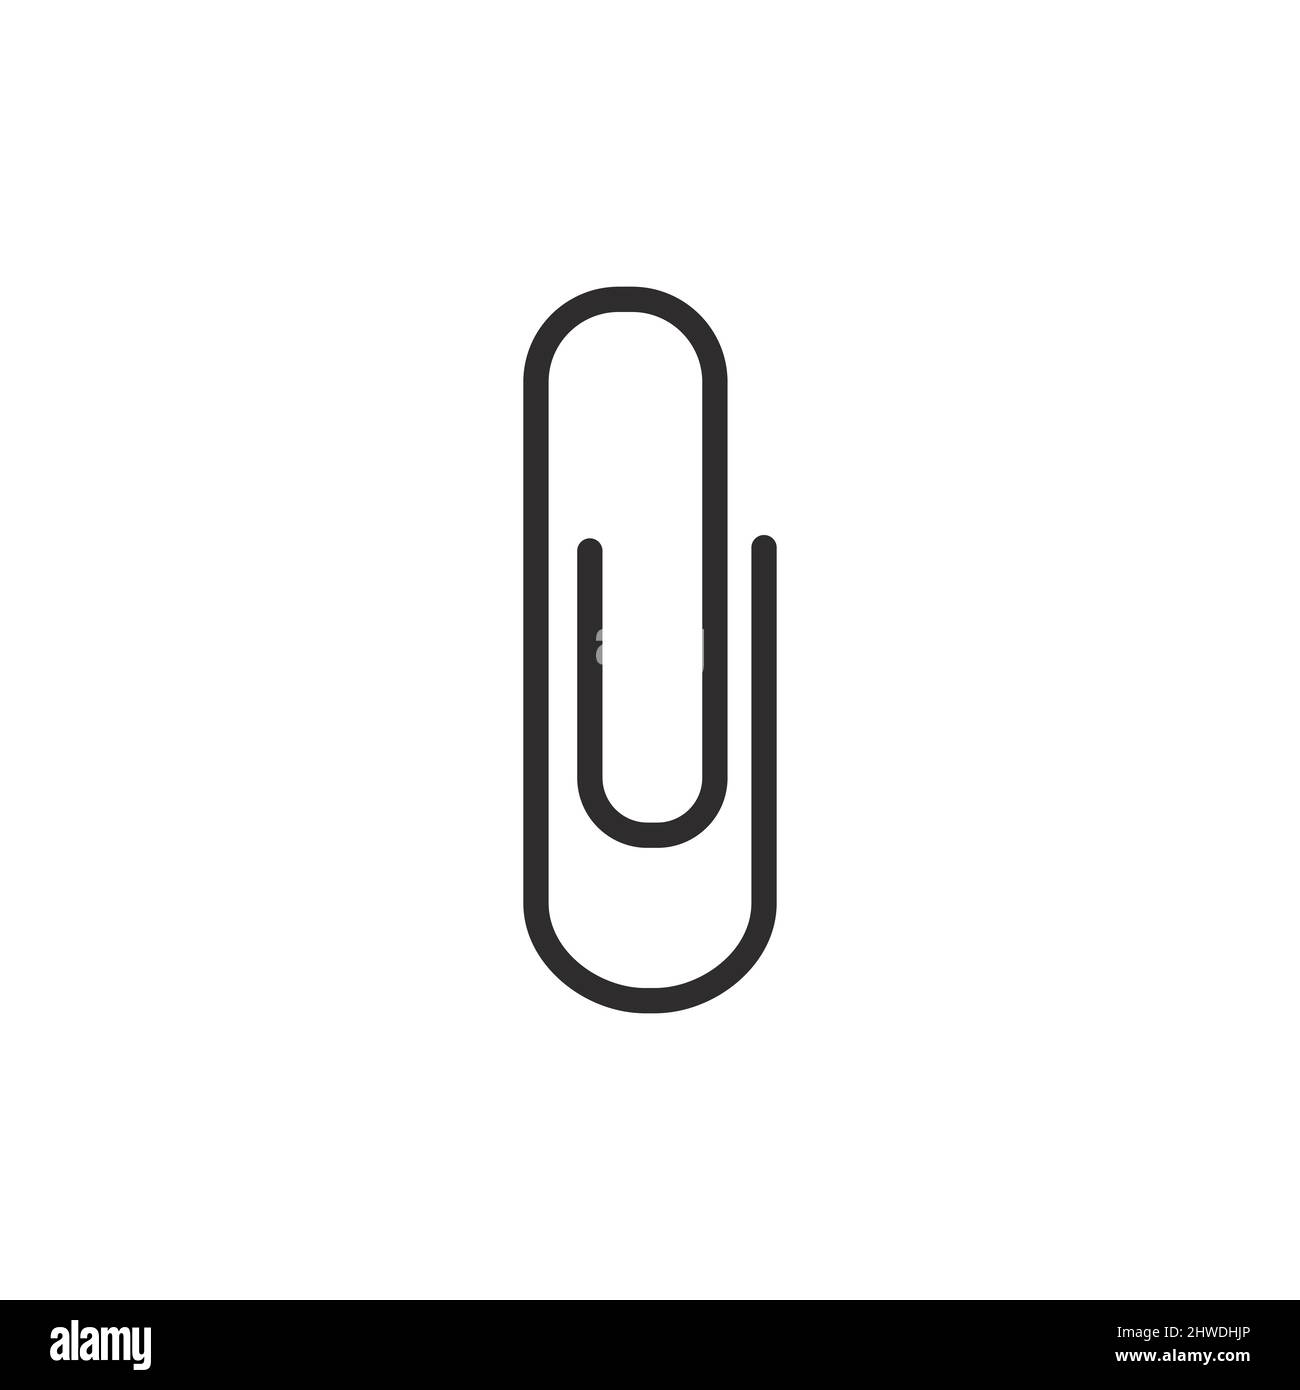 Black isolated icon of paper clip on white background. Silhouette of paper clip. Stock Vector